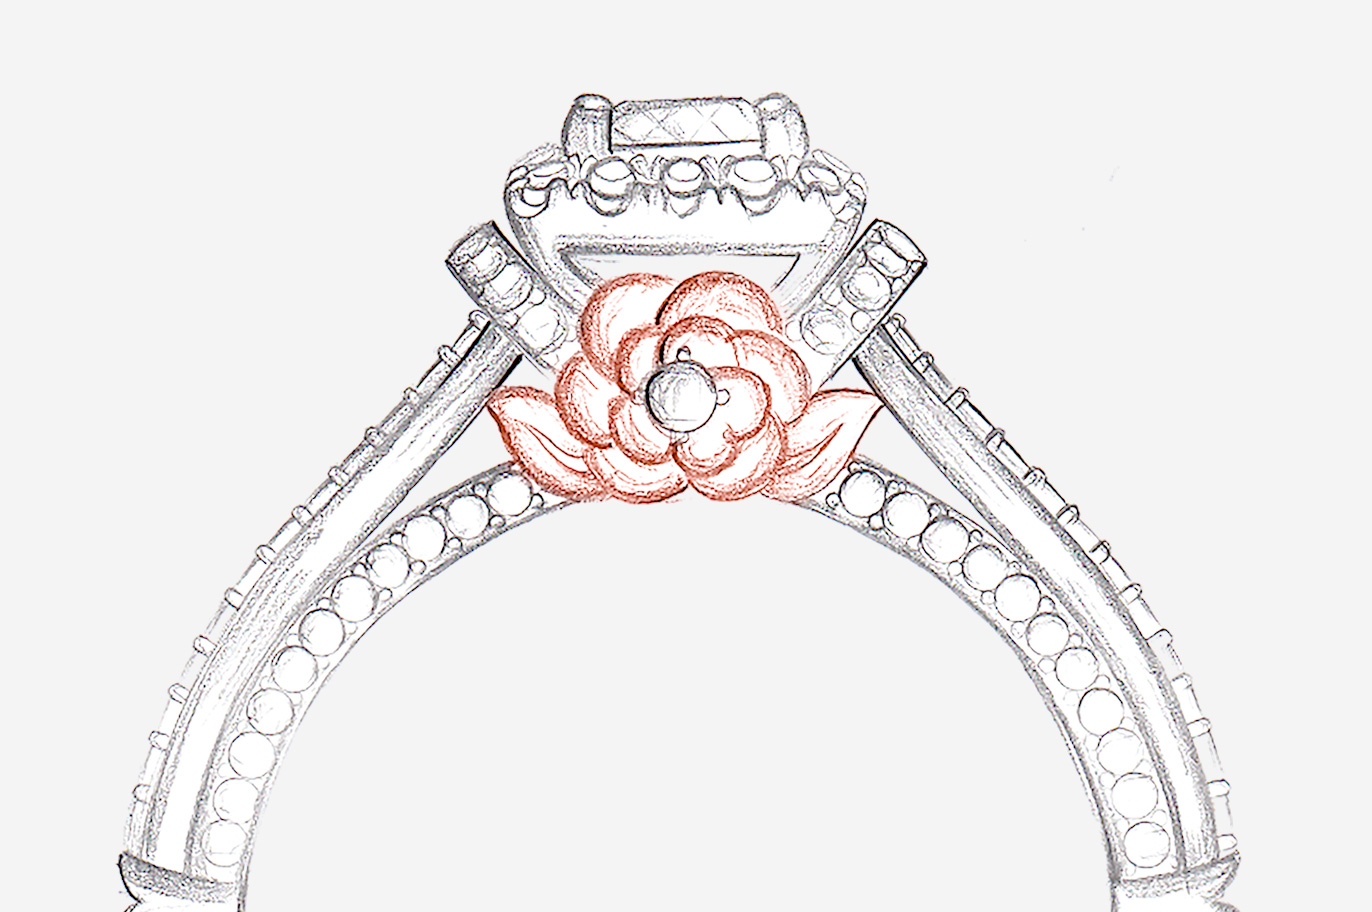 Custom-create a ring inspired by your favorite princess with Enchanted Disney Custom Design.